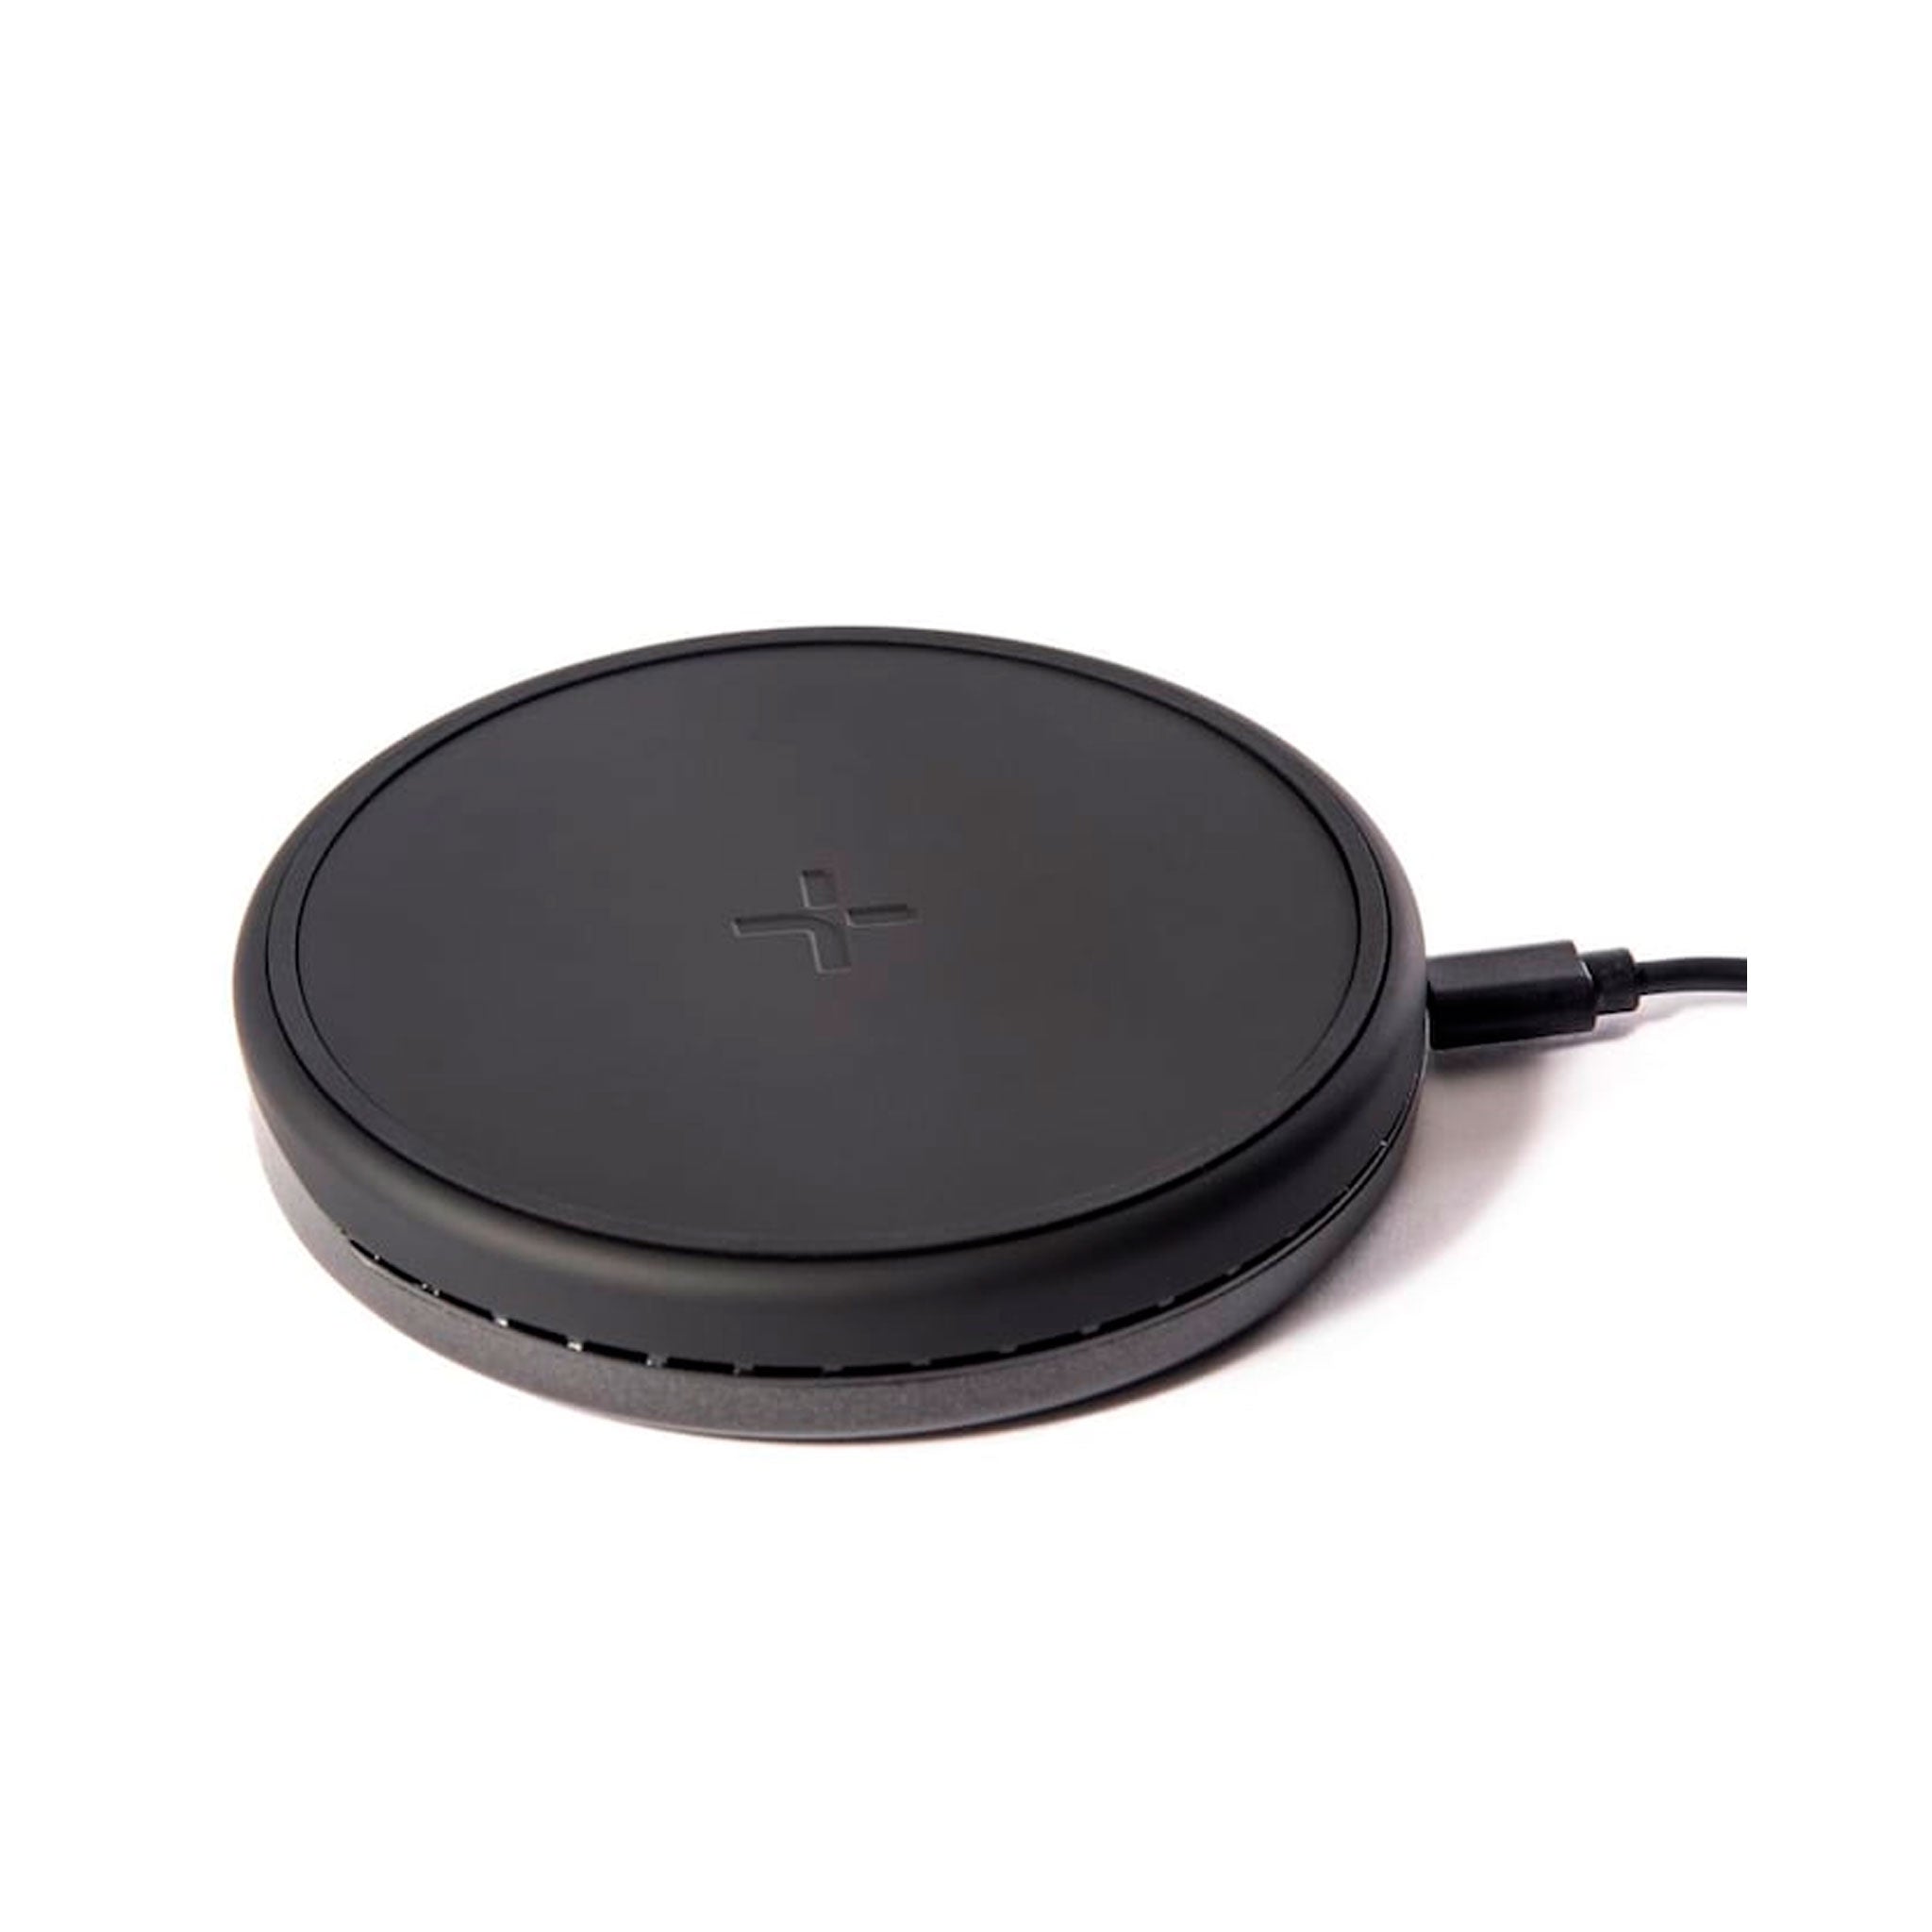 Tylt - Convertible Wireless Charger Stand - Black